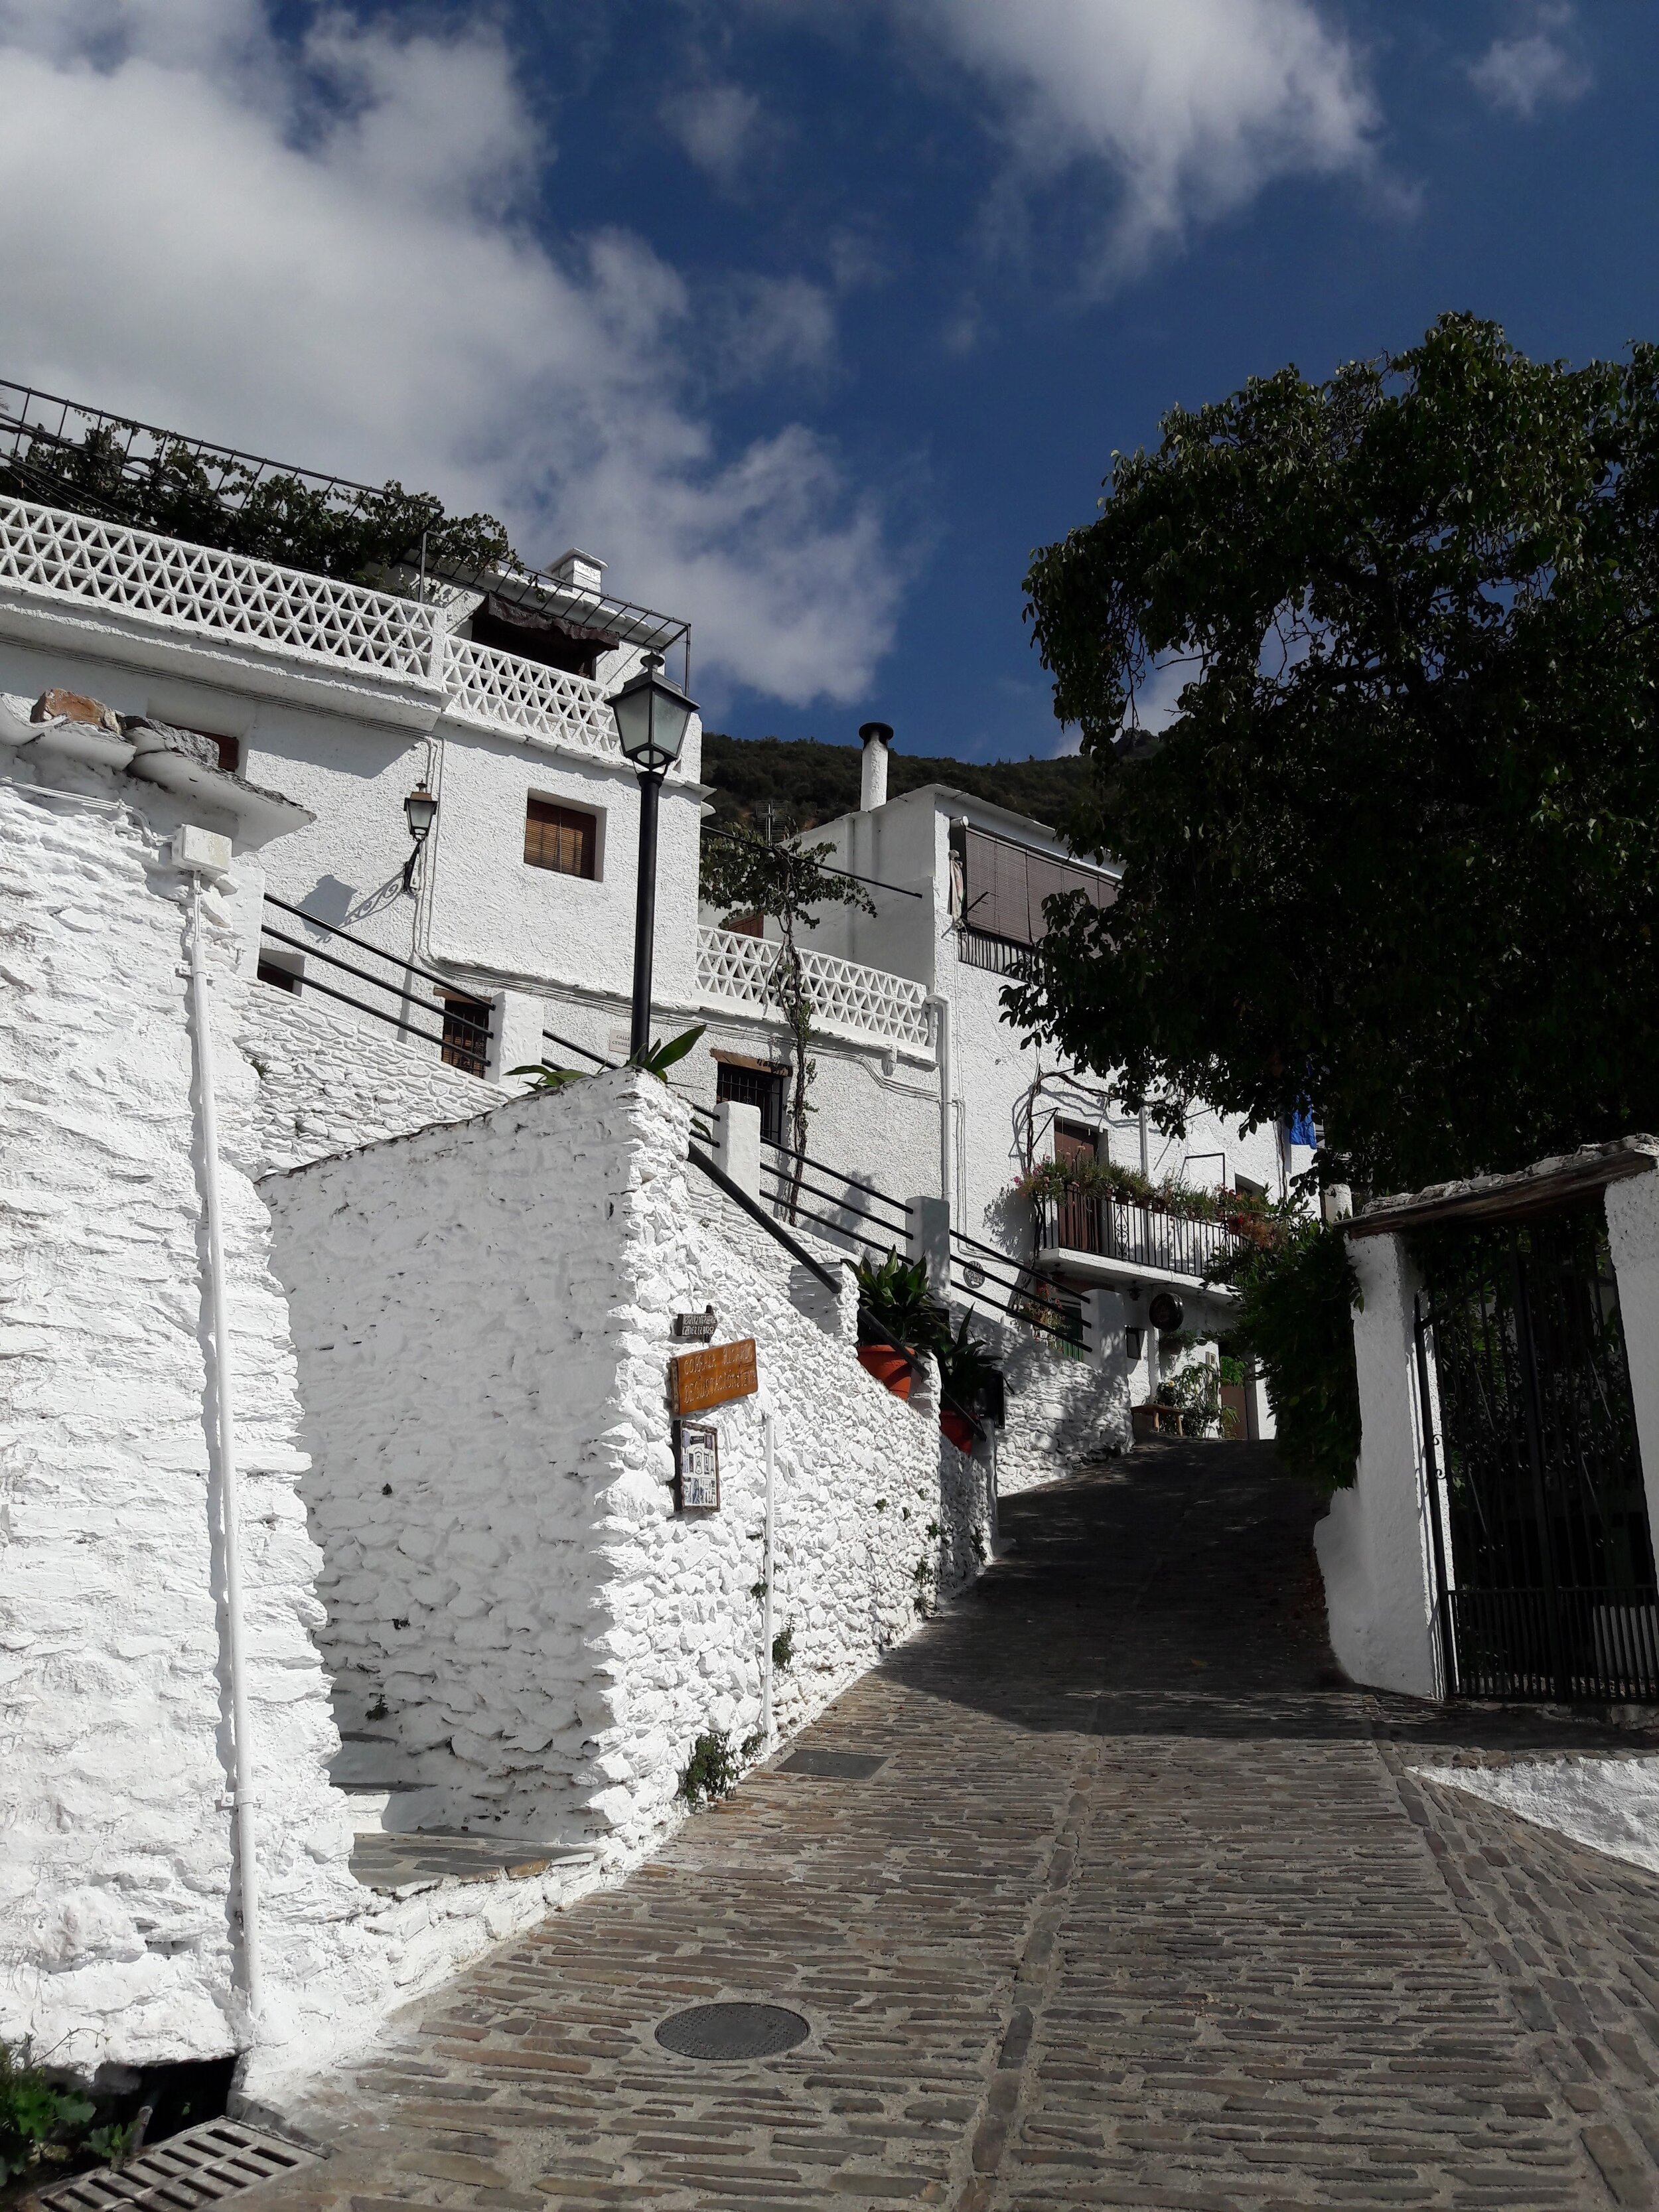 Smaller villages in the Granada province, such as Pampaneira (shown here), offer a unique experience that’s worth staying longer for.